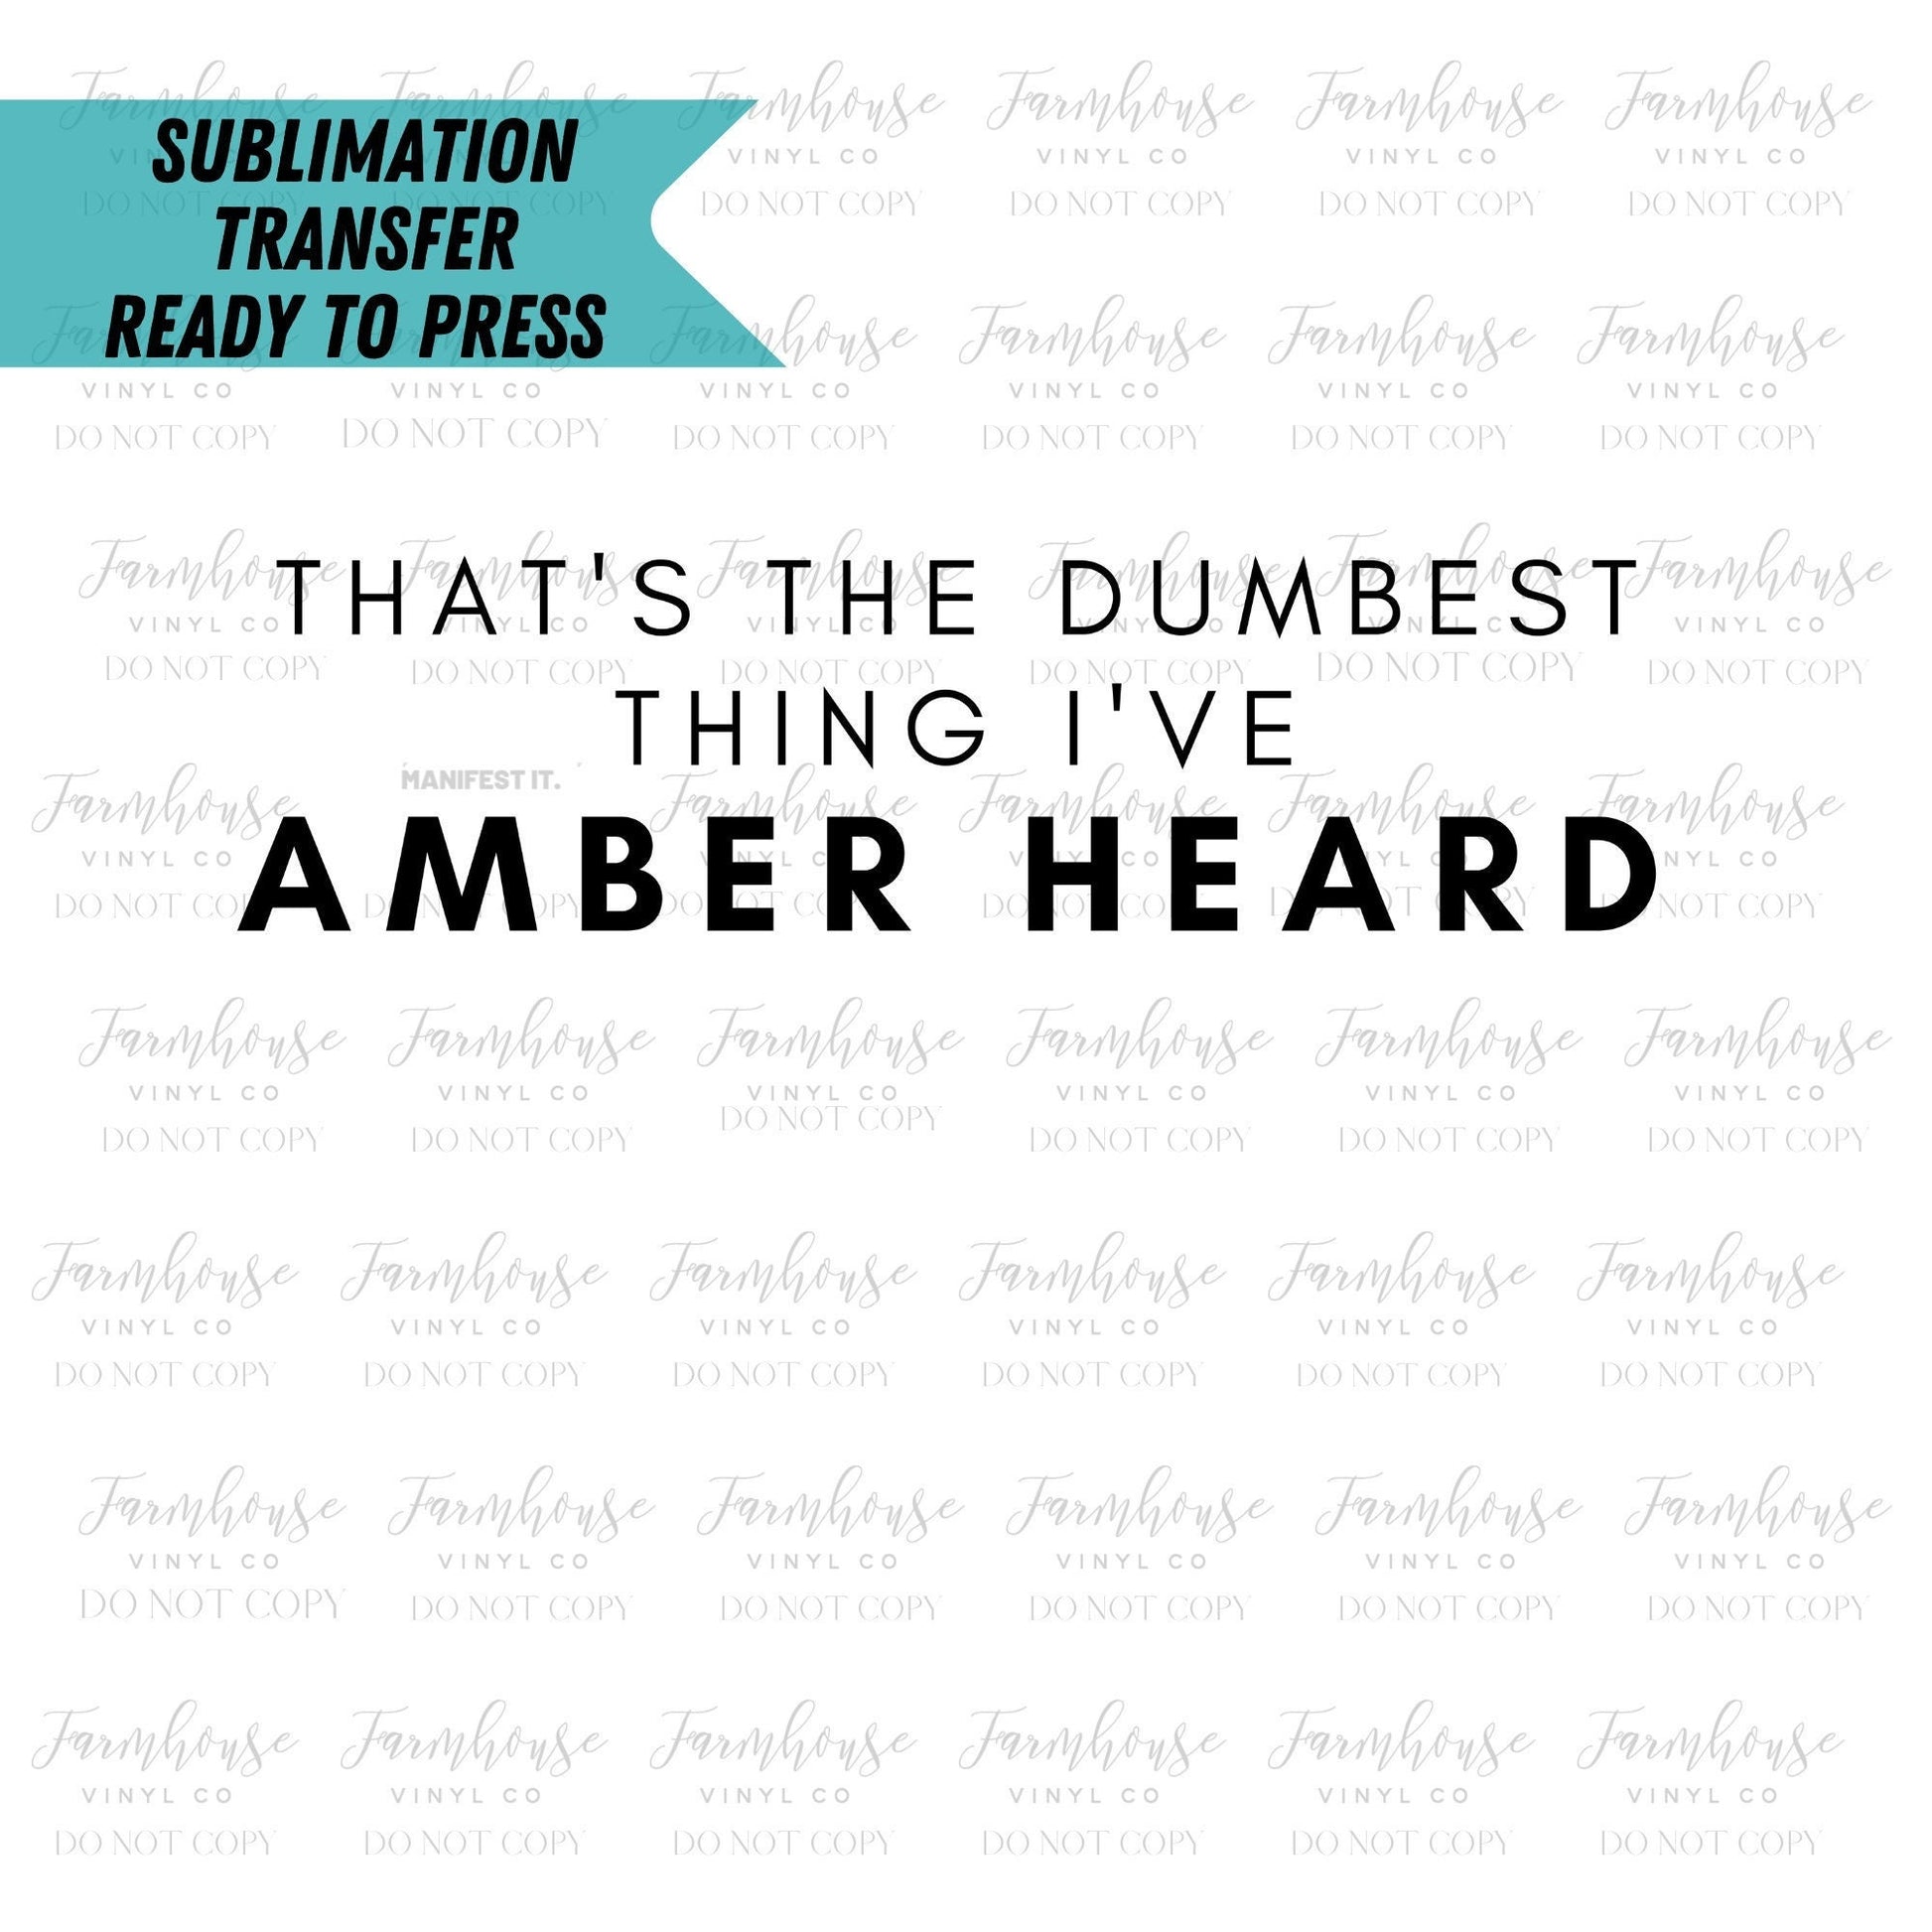 That’s the Dumbest Thing I’ve Amber Heard Ready to Press Sublimation Transfer - Farmhouse Vinyl Co